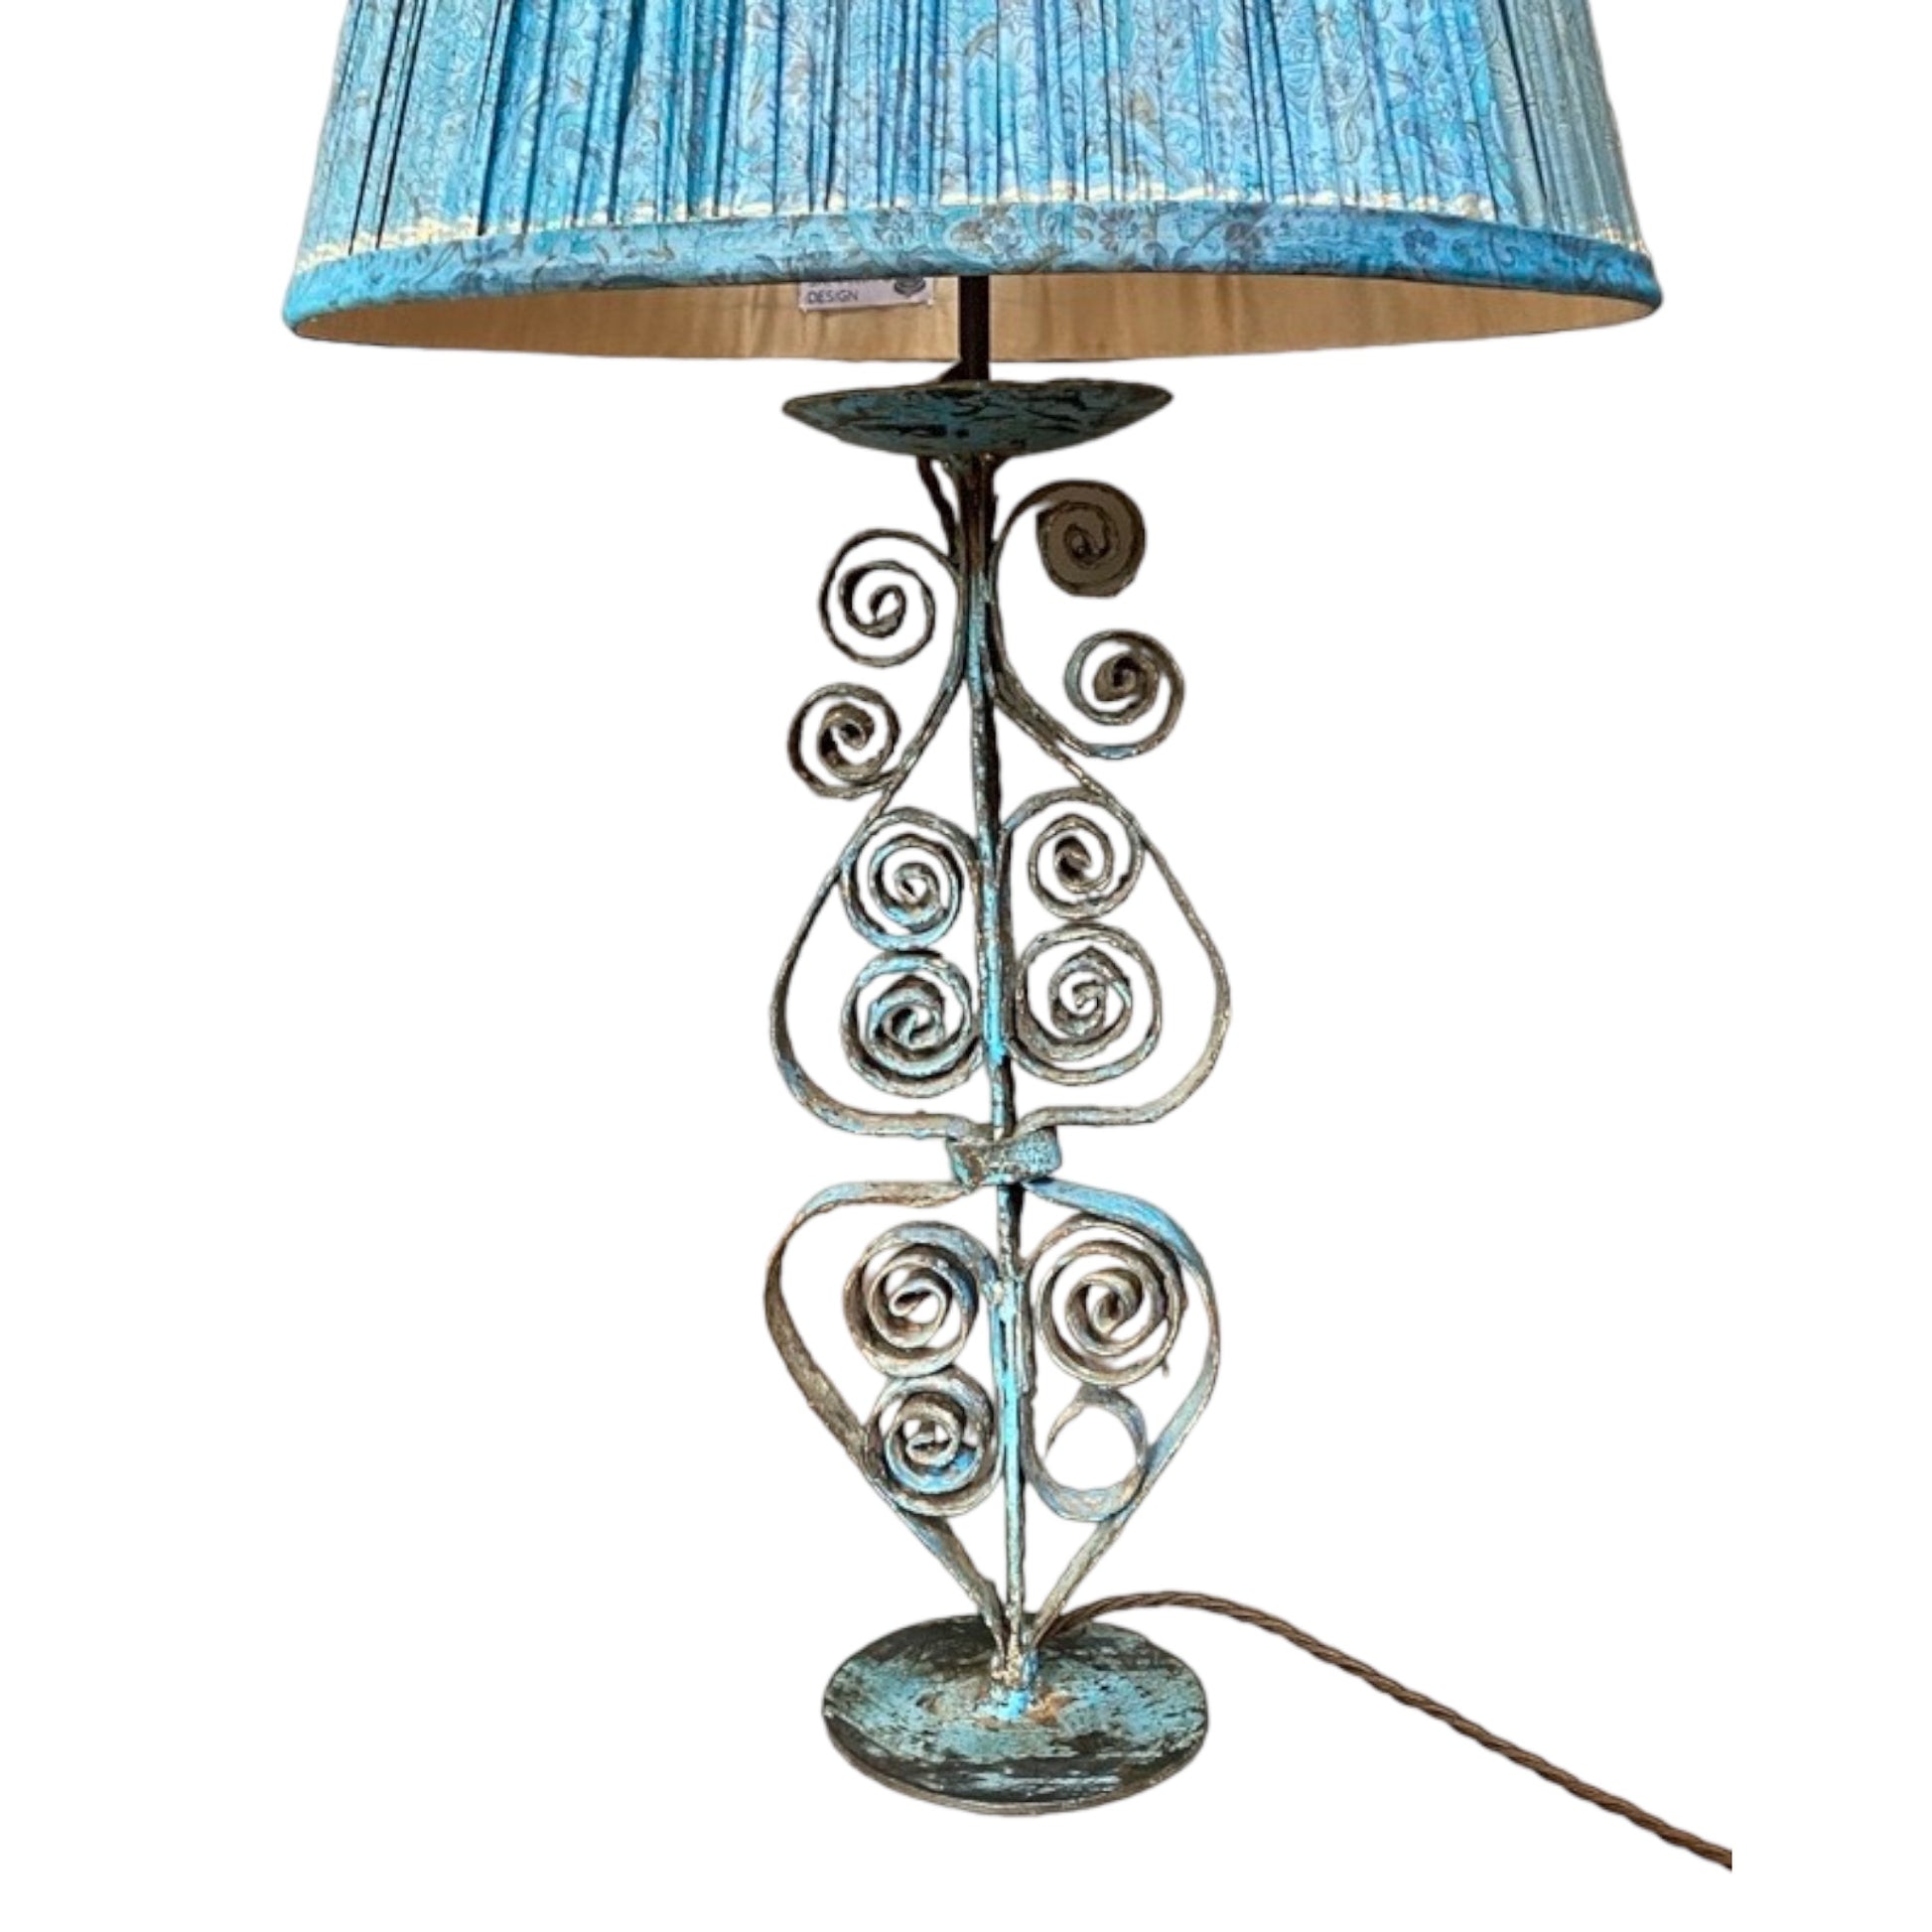 Curly candlestick table lamp